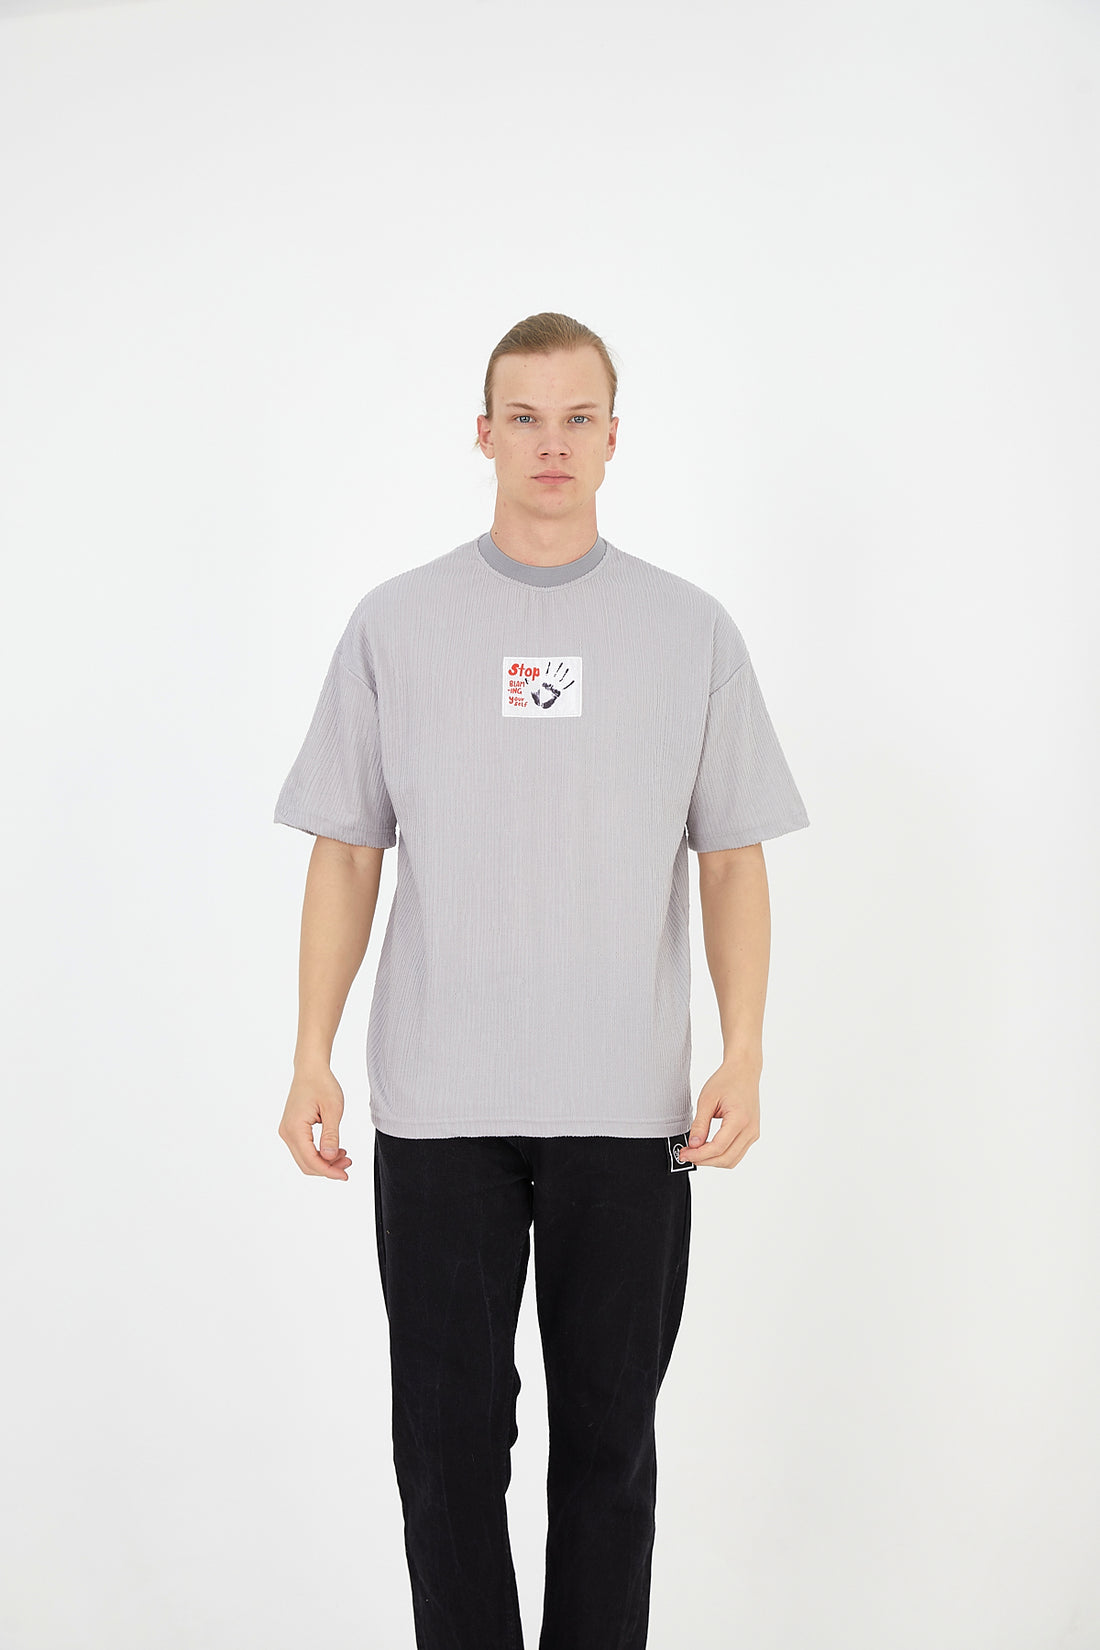 T-SHIRT - STOP STOPPING YOURSELF - GREY - DYS-Amsterdam